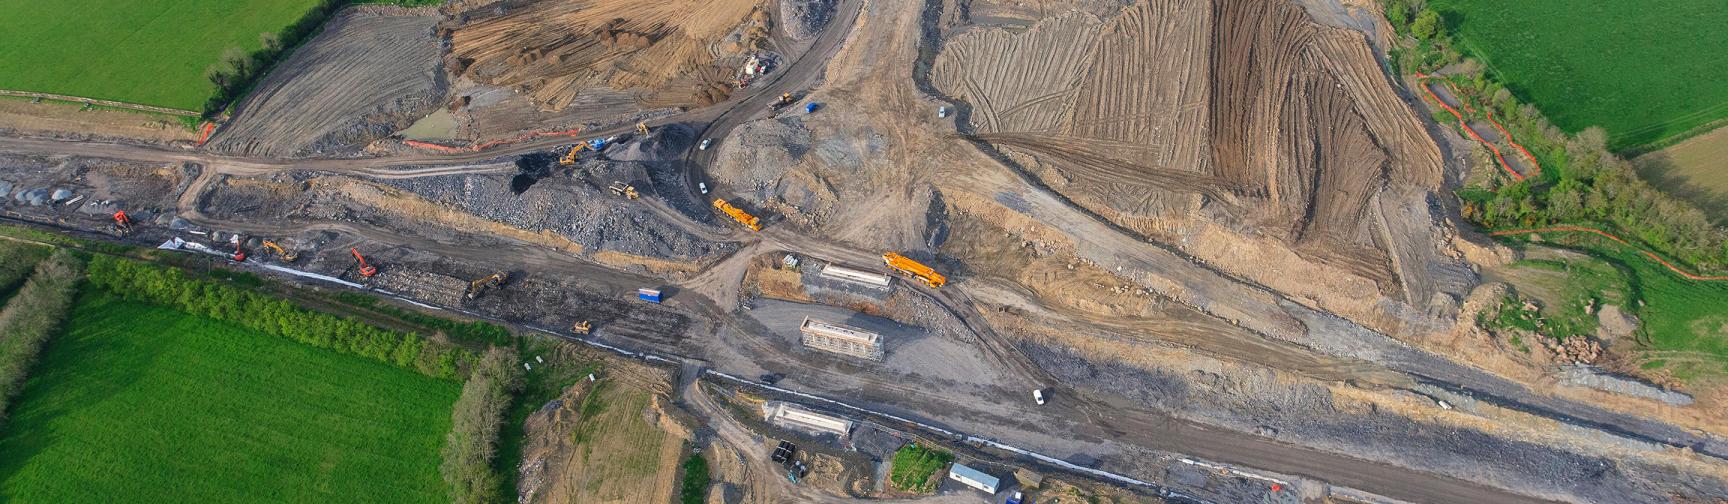 Aerial view of a motorway under construction